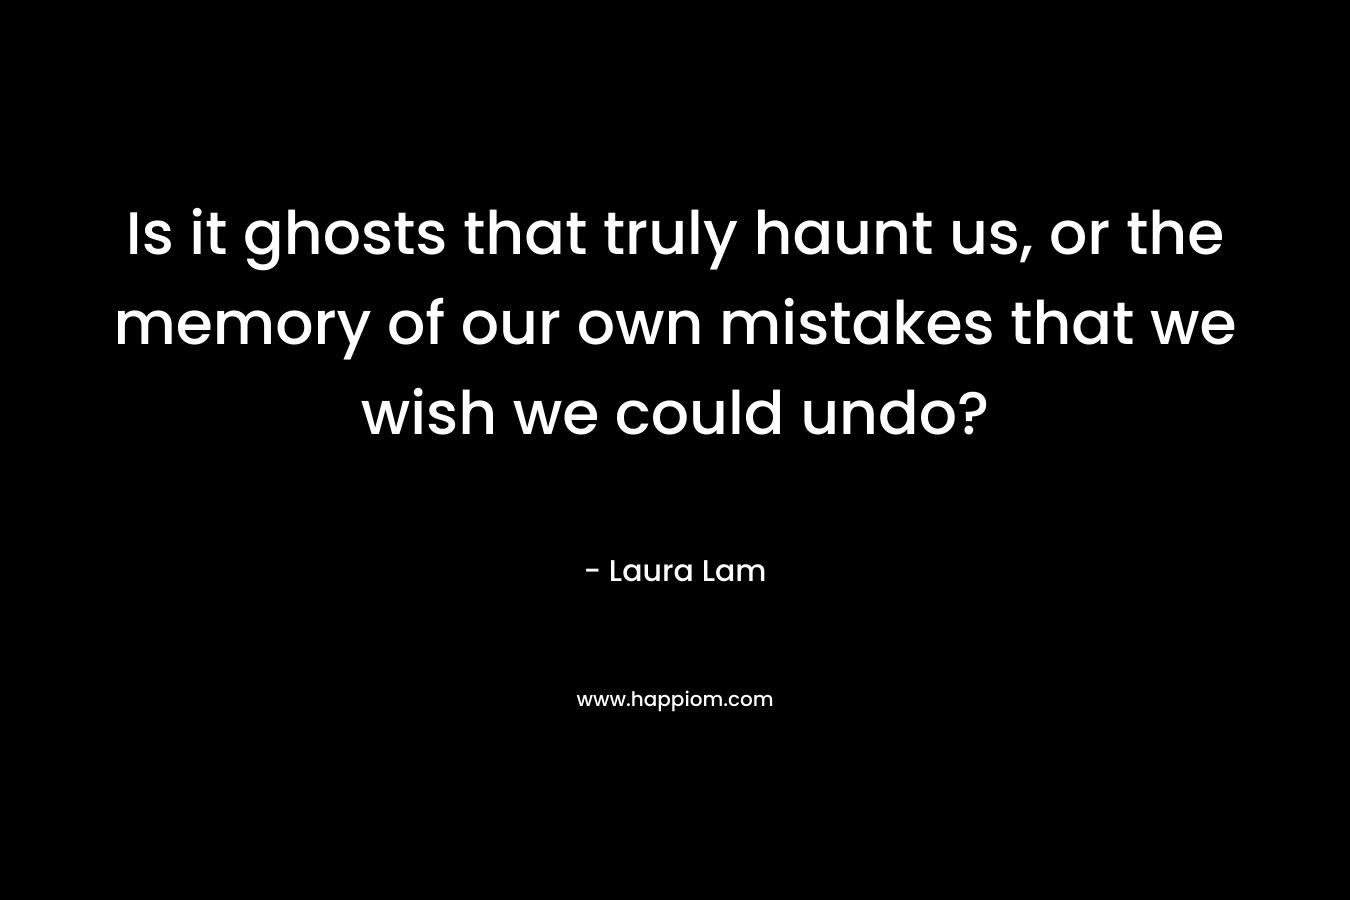 Is it ghosts that truly haunt us, or the memory of our own mistakes that we wish we could undo?